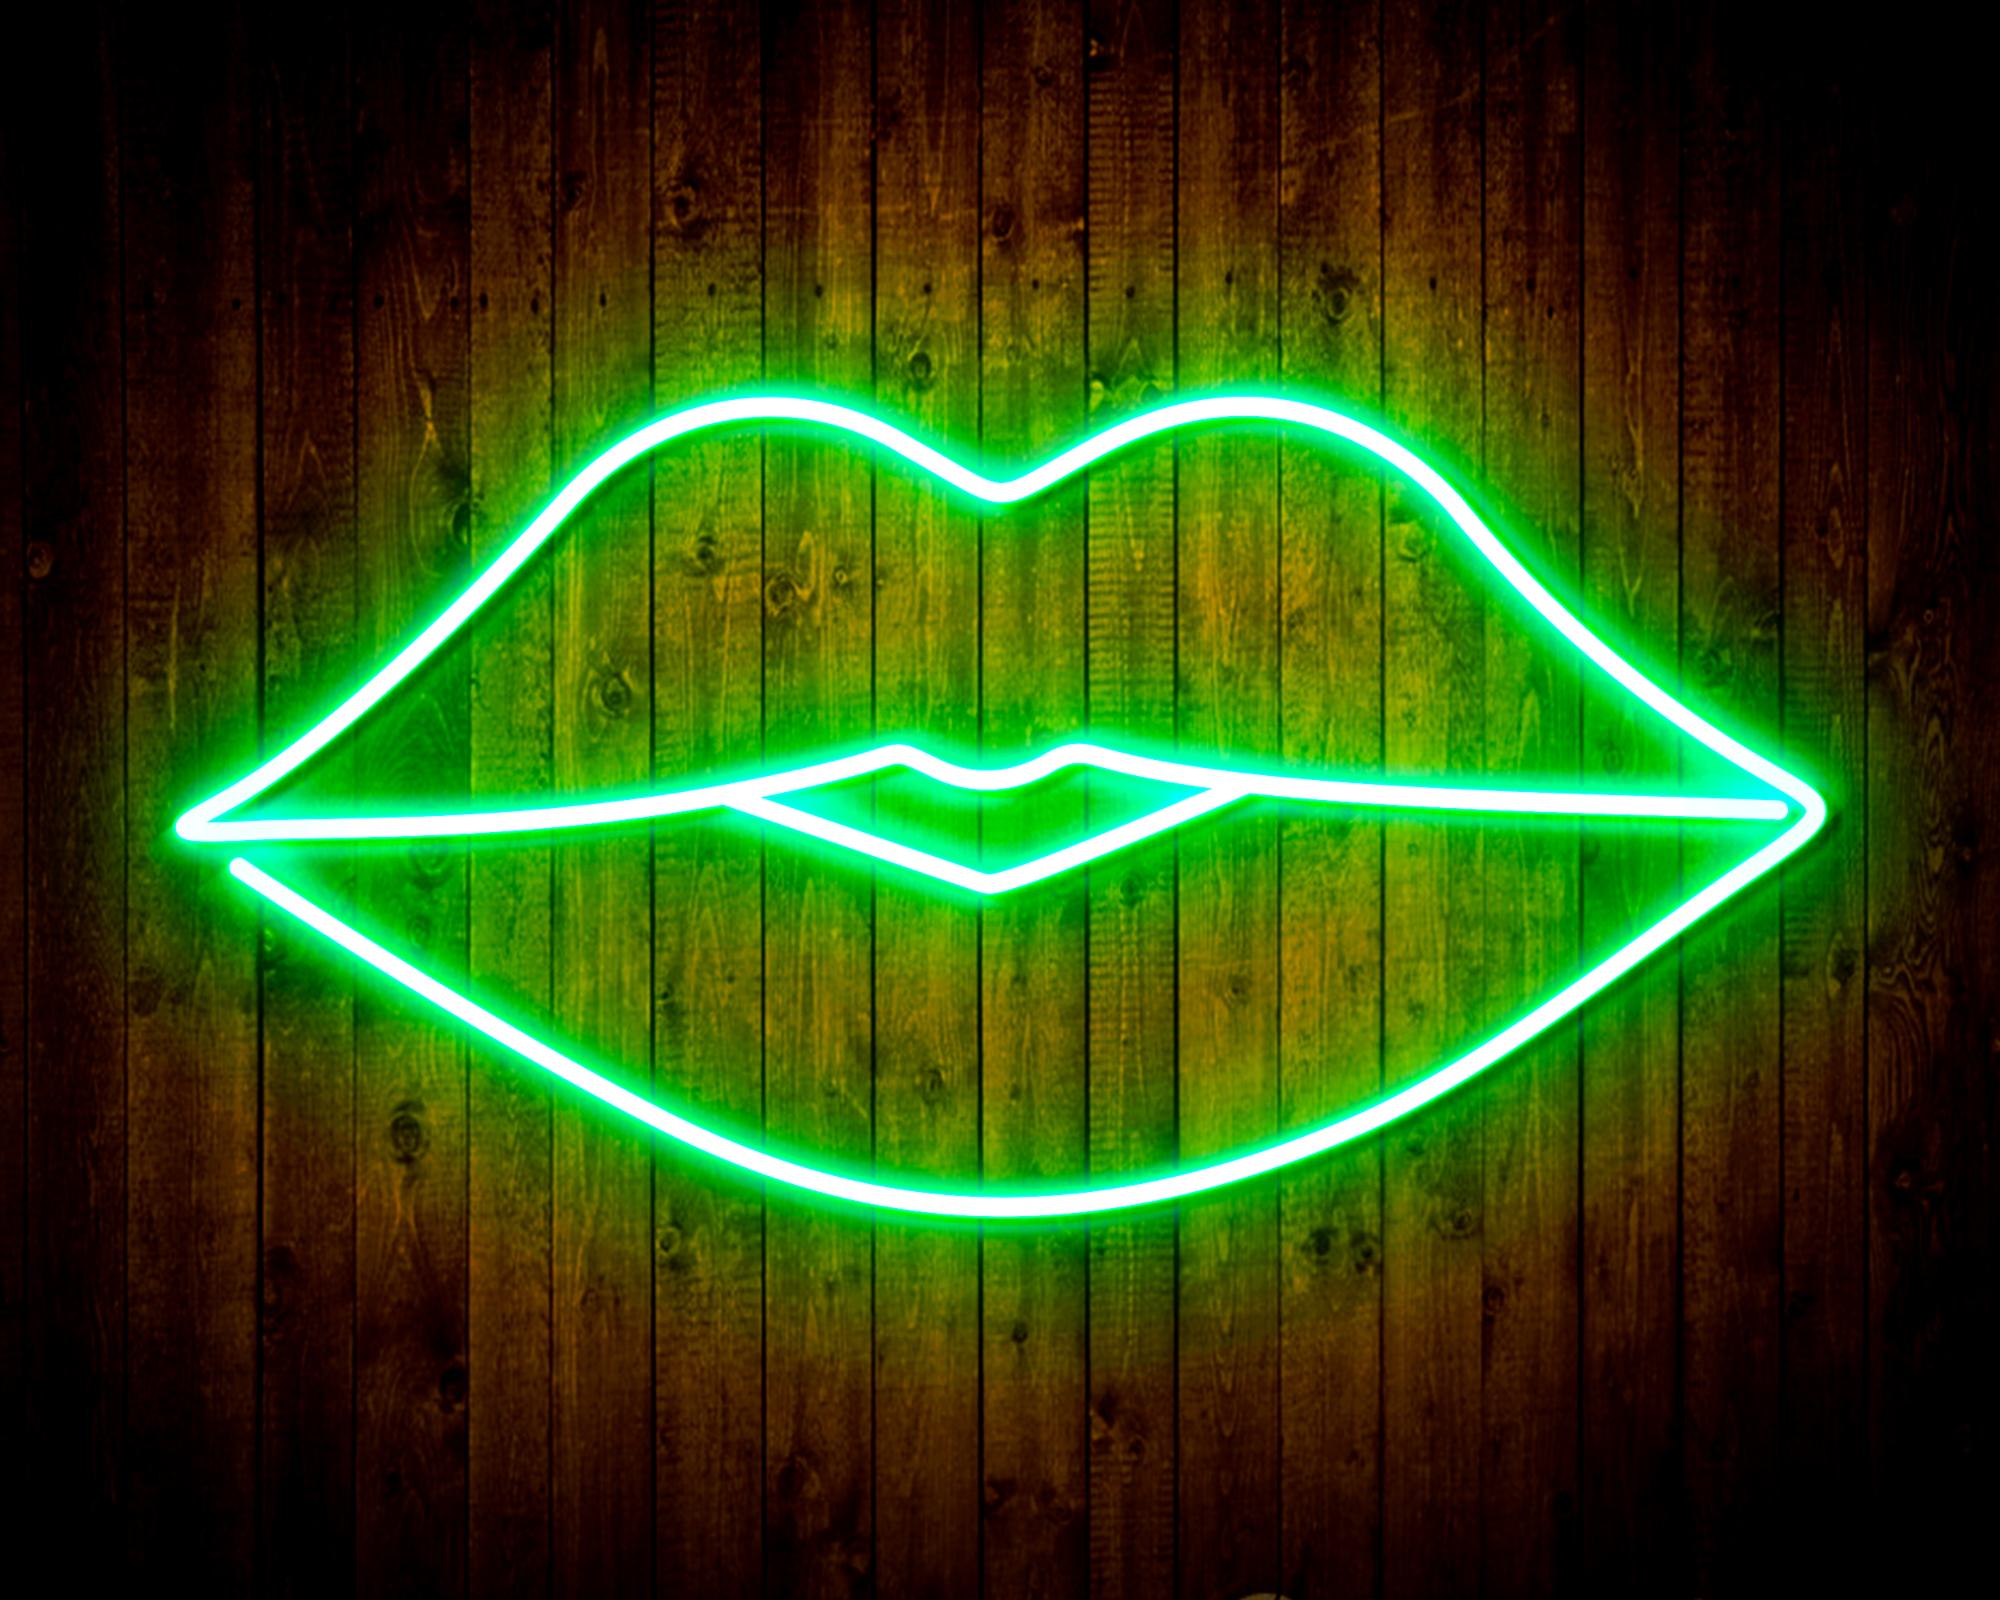 Red Lips LED Neon Sign